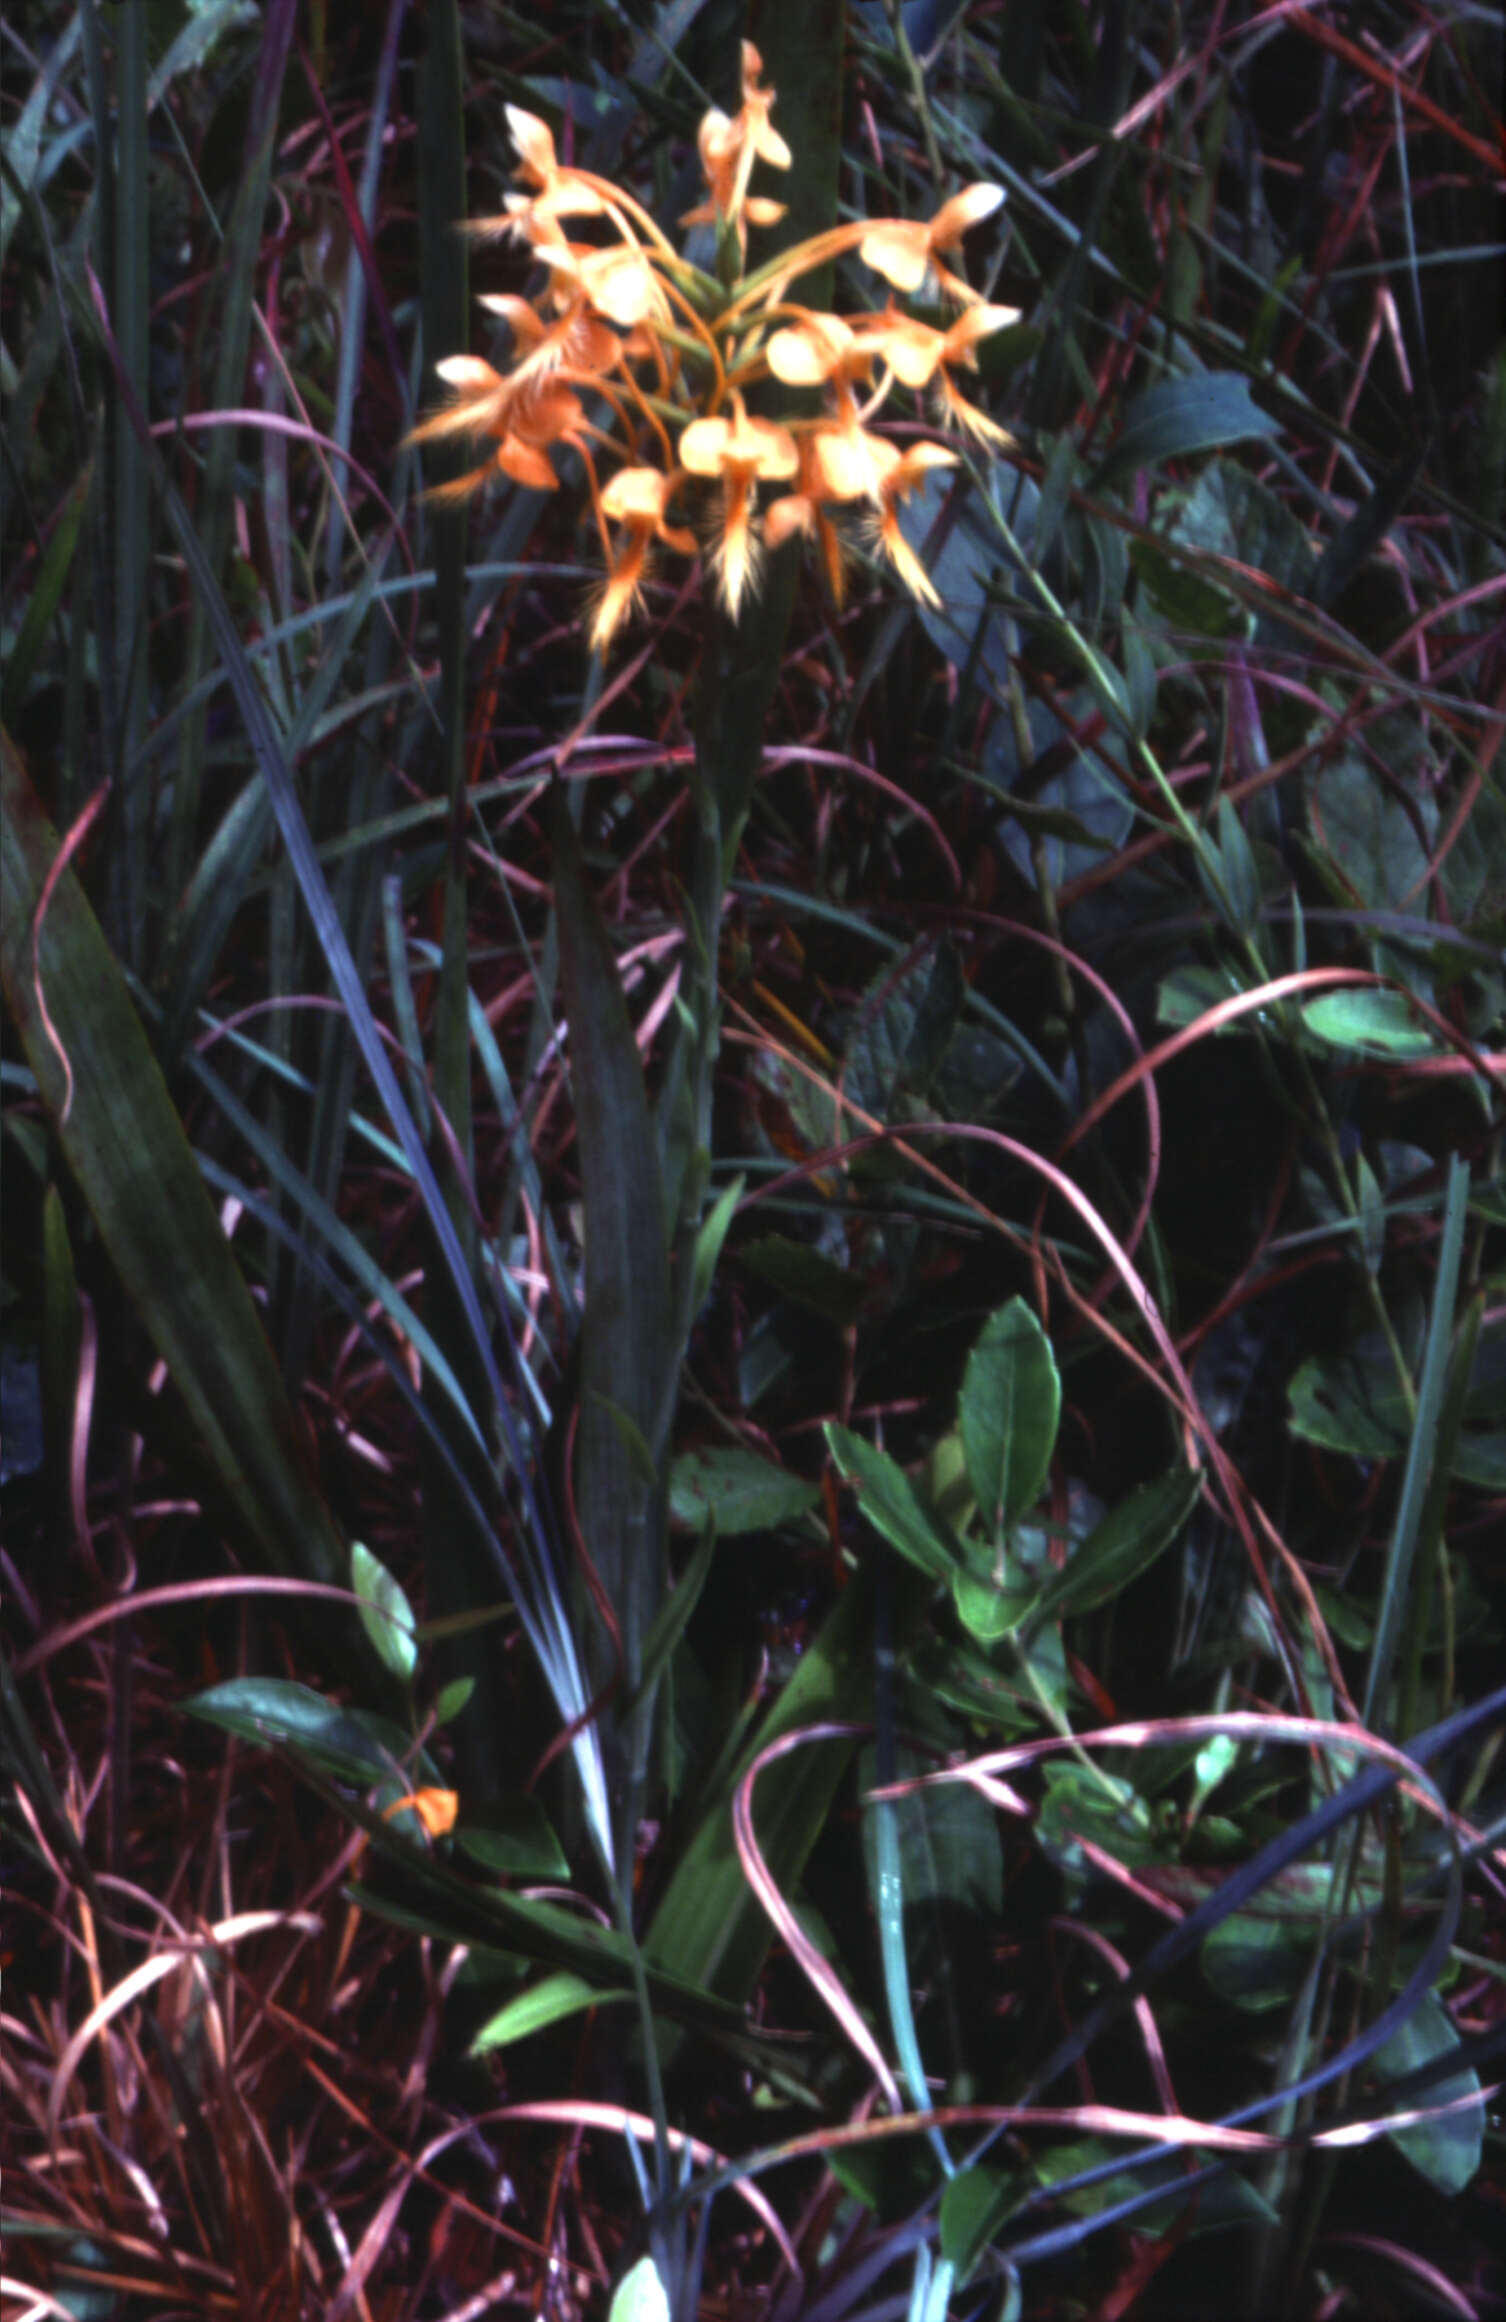 Image of Yellow fringed orchid